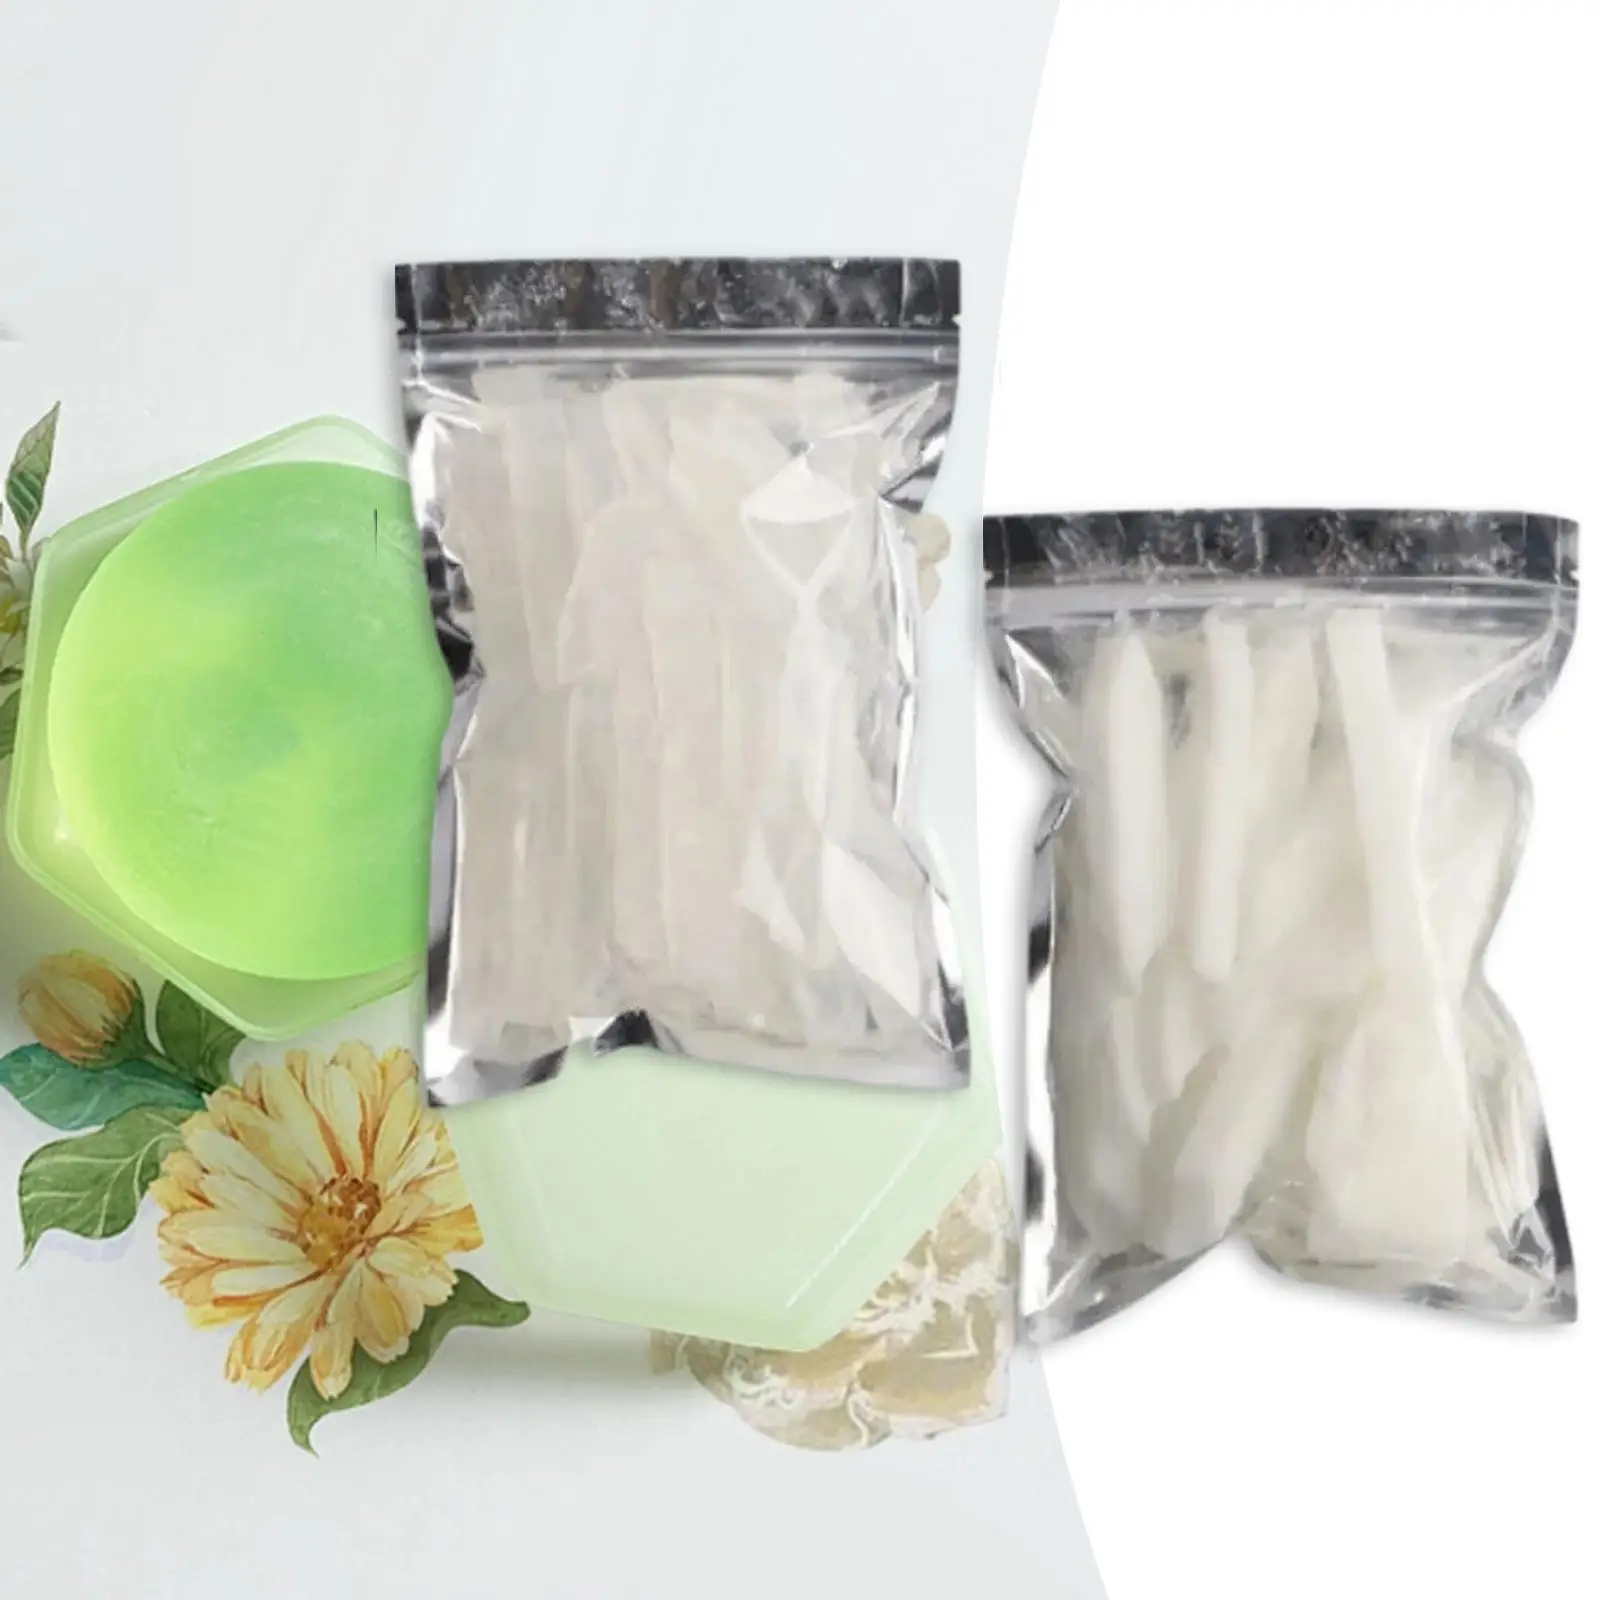 Soap Base Soap DIY Supplies Coconut Oil, Palm Oil, Glycerin Clear and White Handmade Soap Material Soap Crafting Beginners